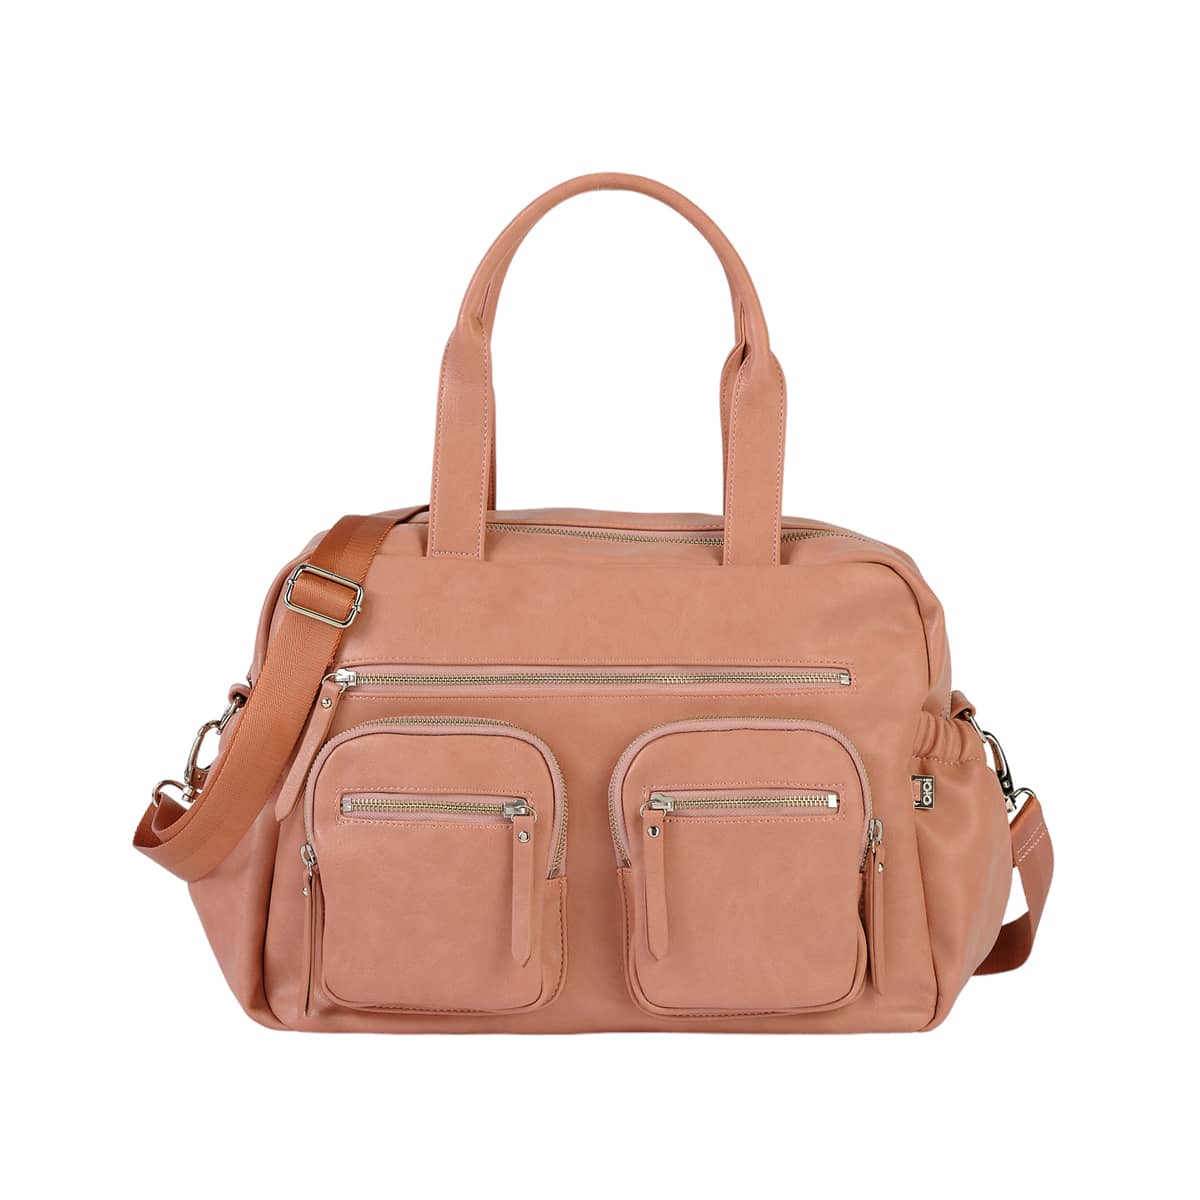 OiOi Faux Leather Carry All Nappy Bag - Dusty Rose